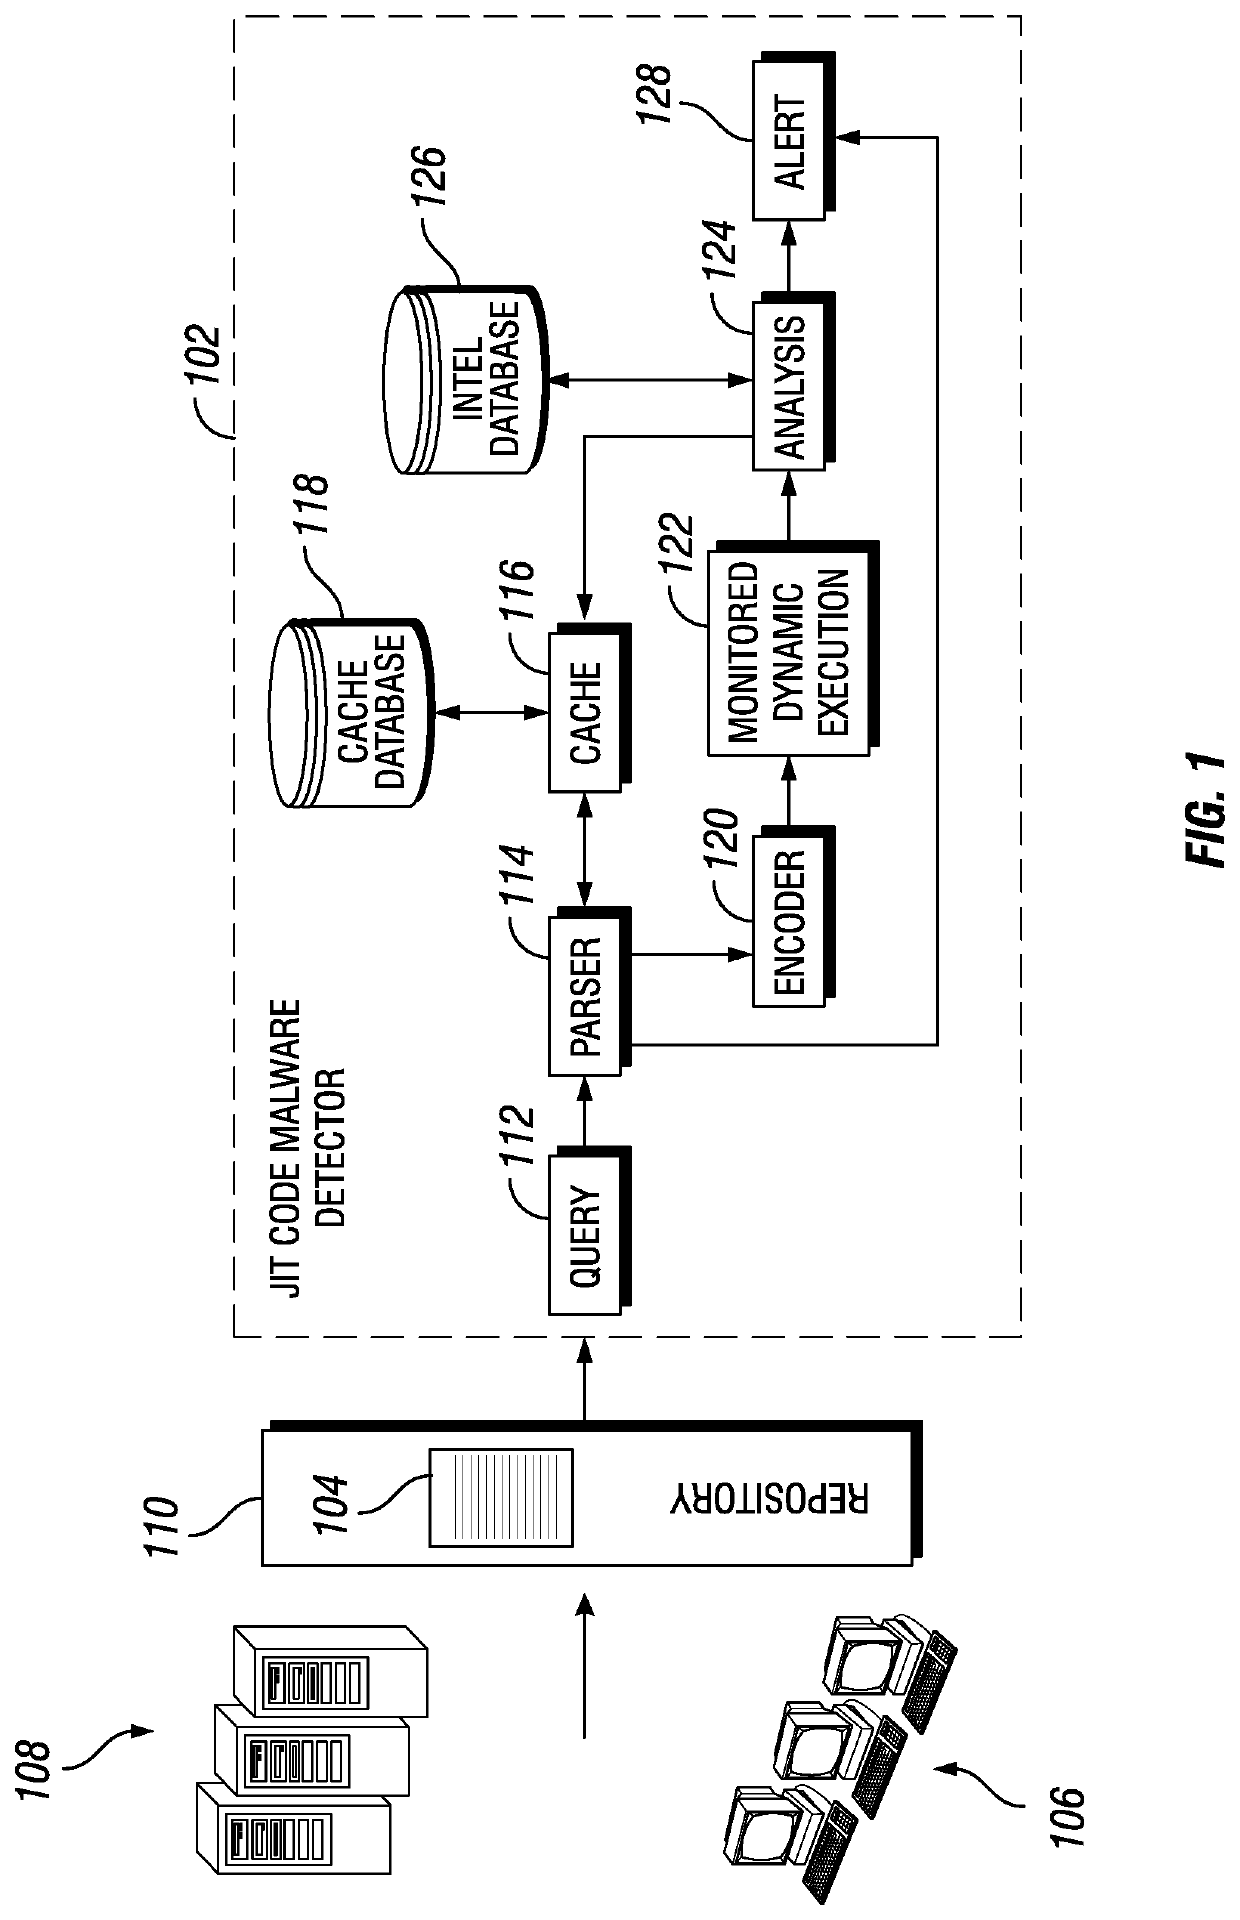 Systems and Methods for Detecting Obfuscated Malware in Obfuscated Just-In-Time (JIT) Compiled Code